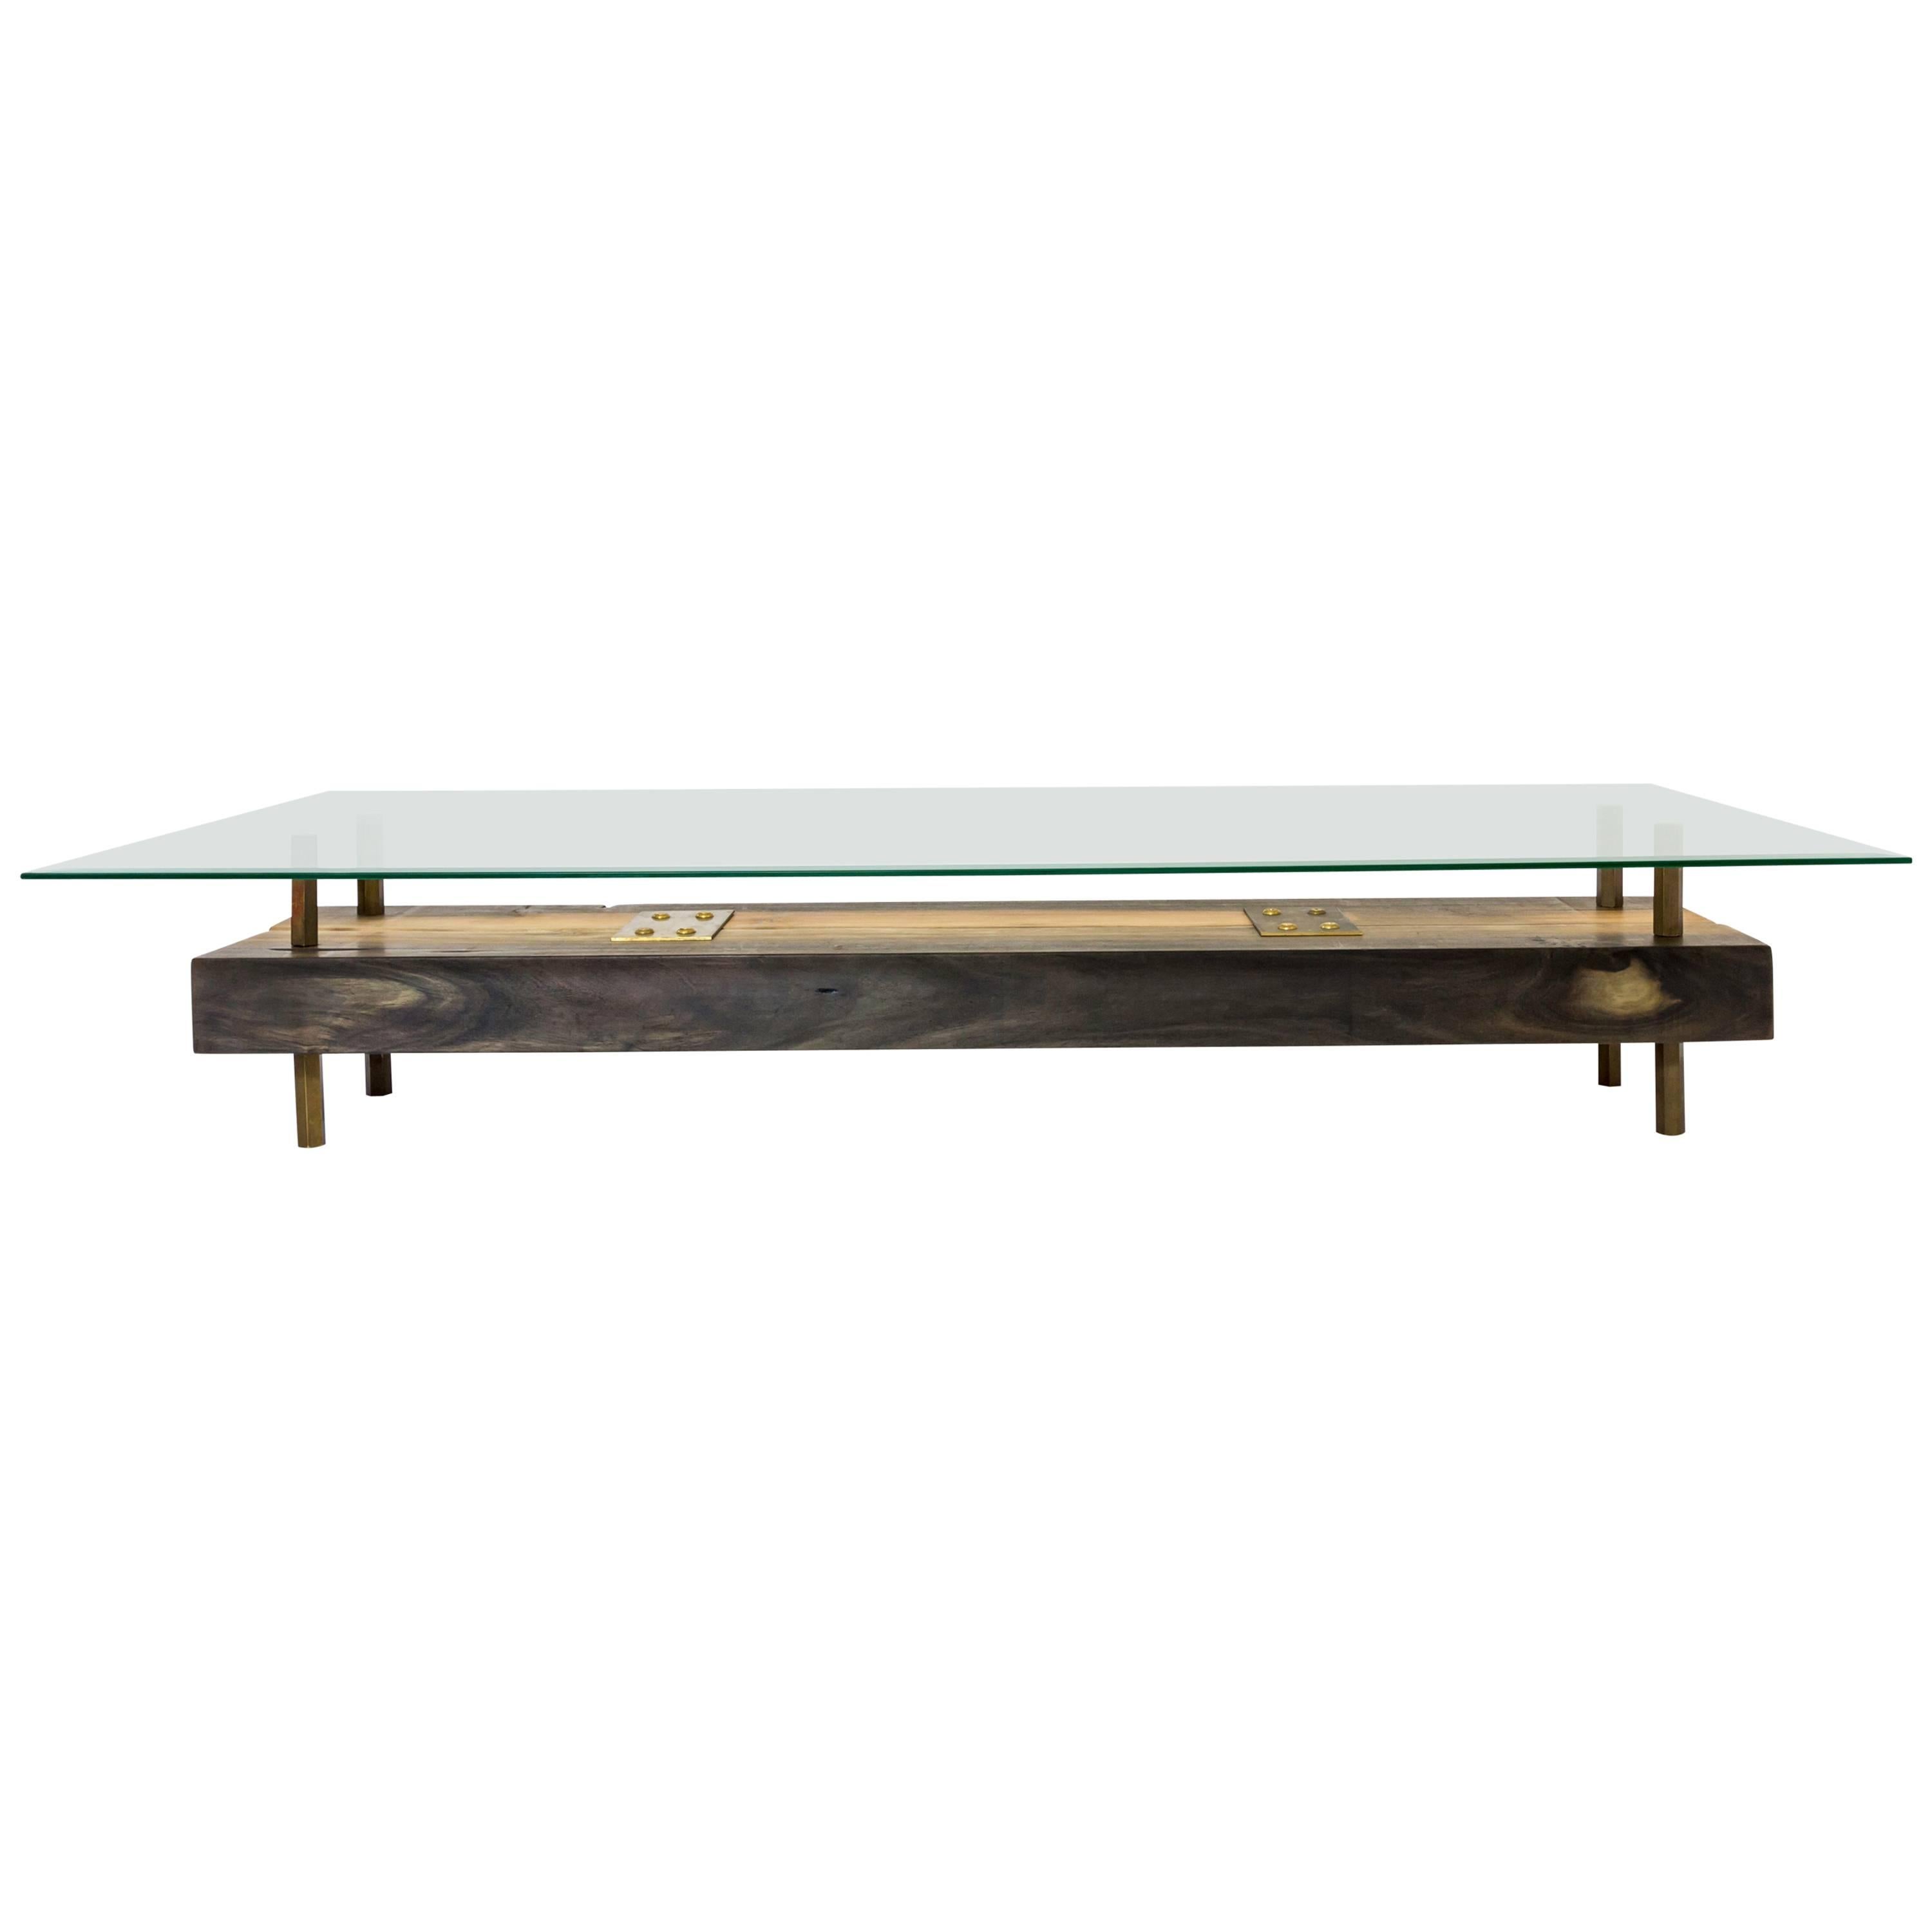 Rectangular Connection of Mahoe Wood, Brass Legs & Glass Cocktail, Coffee Table